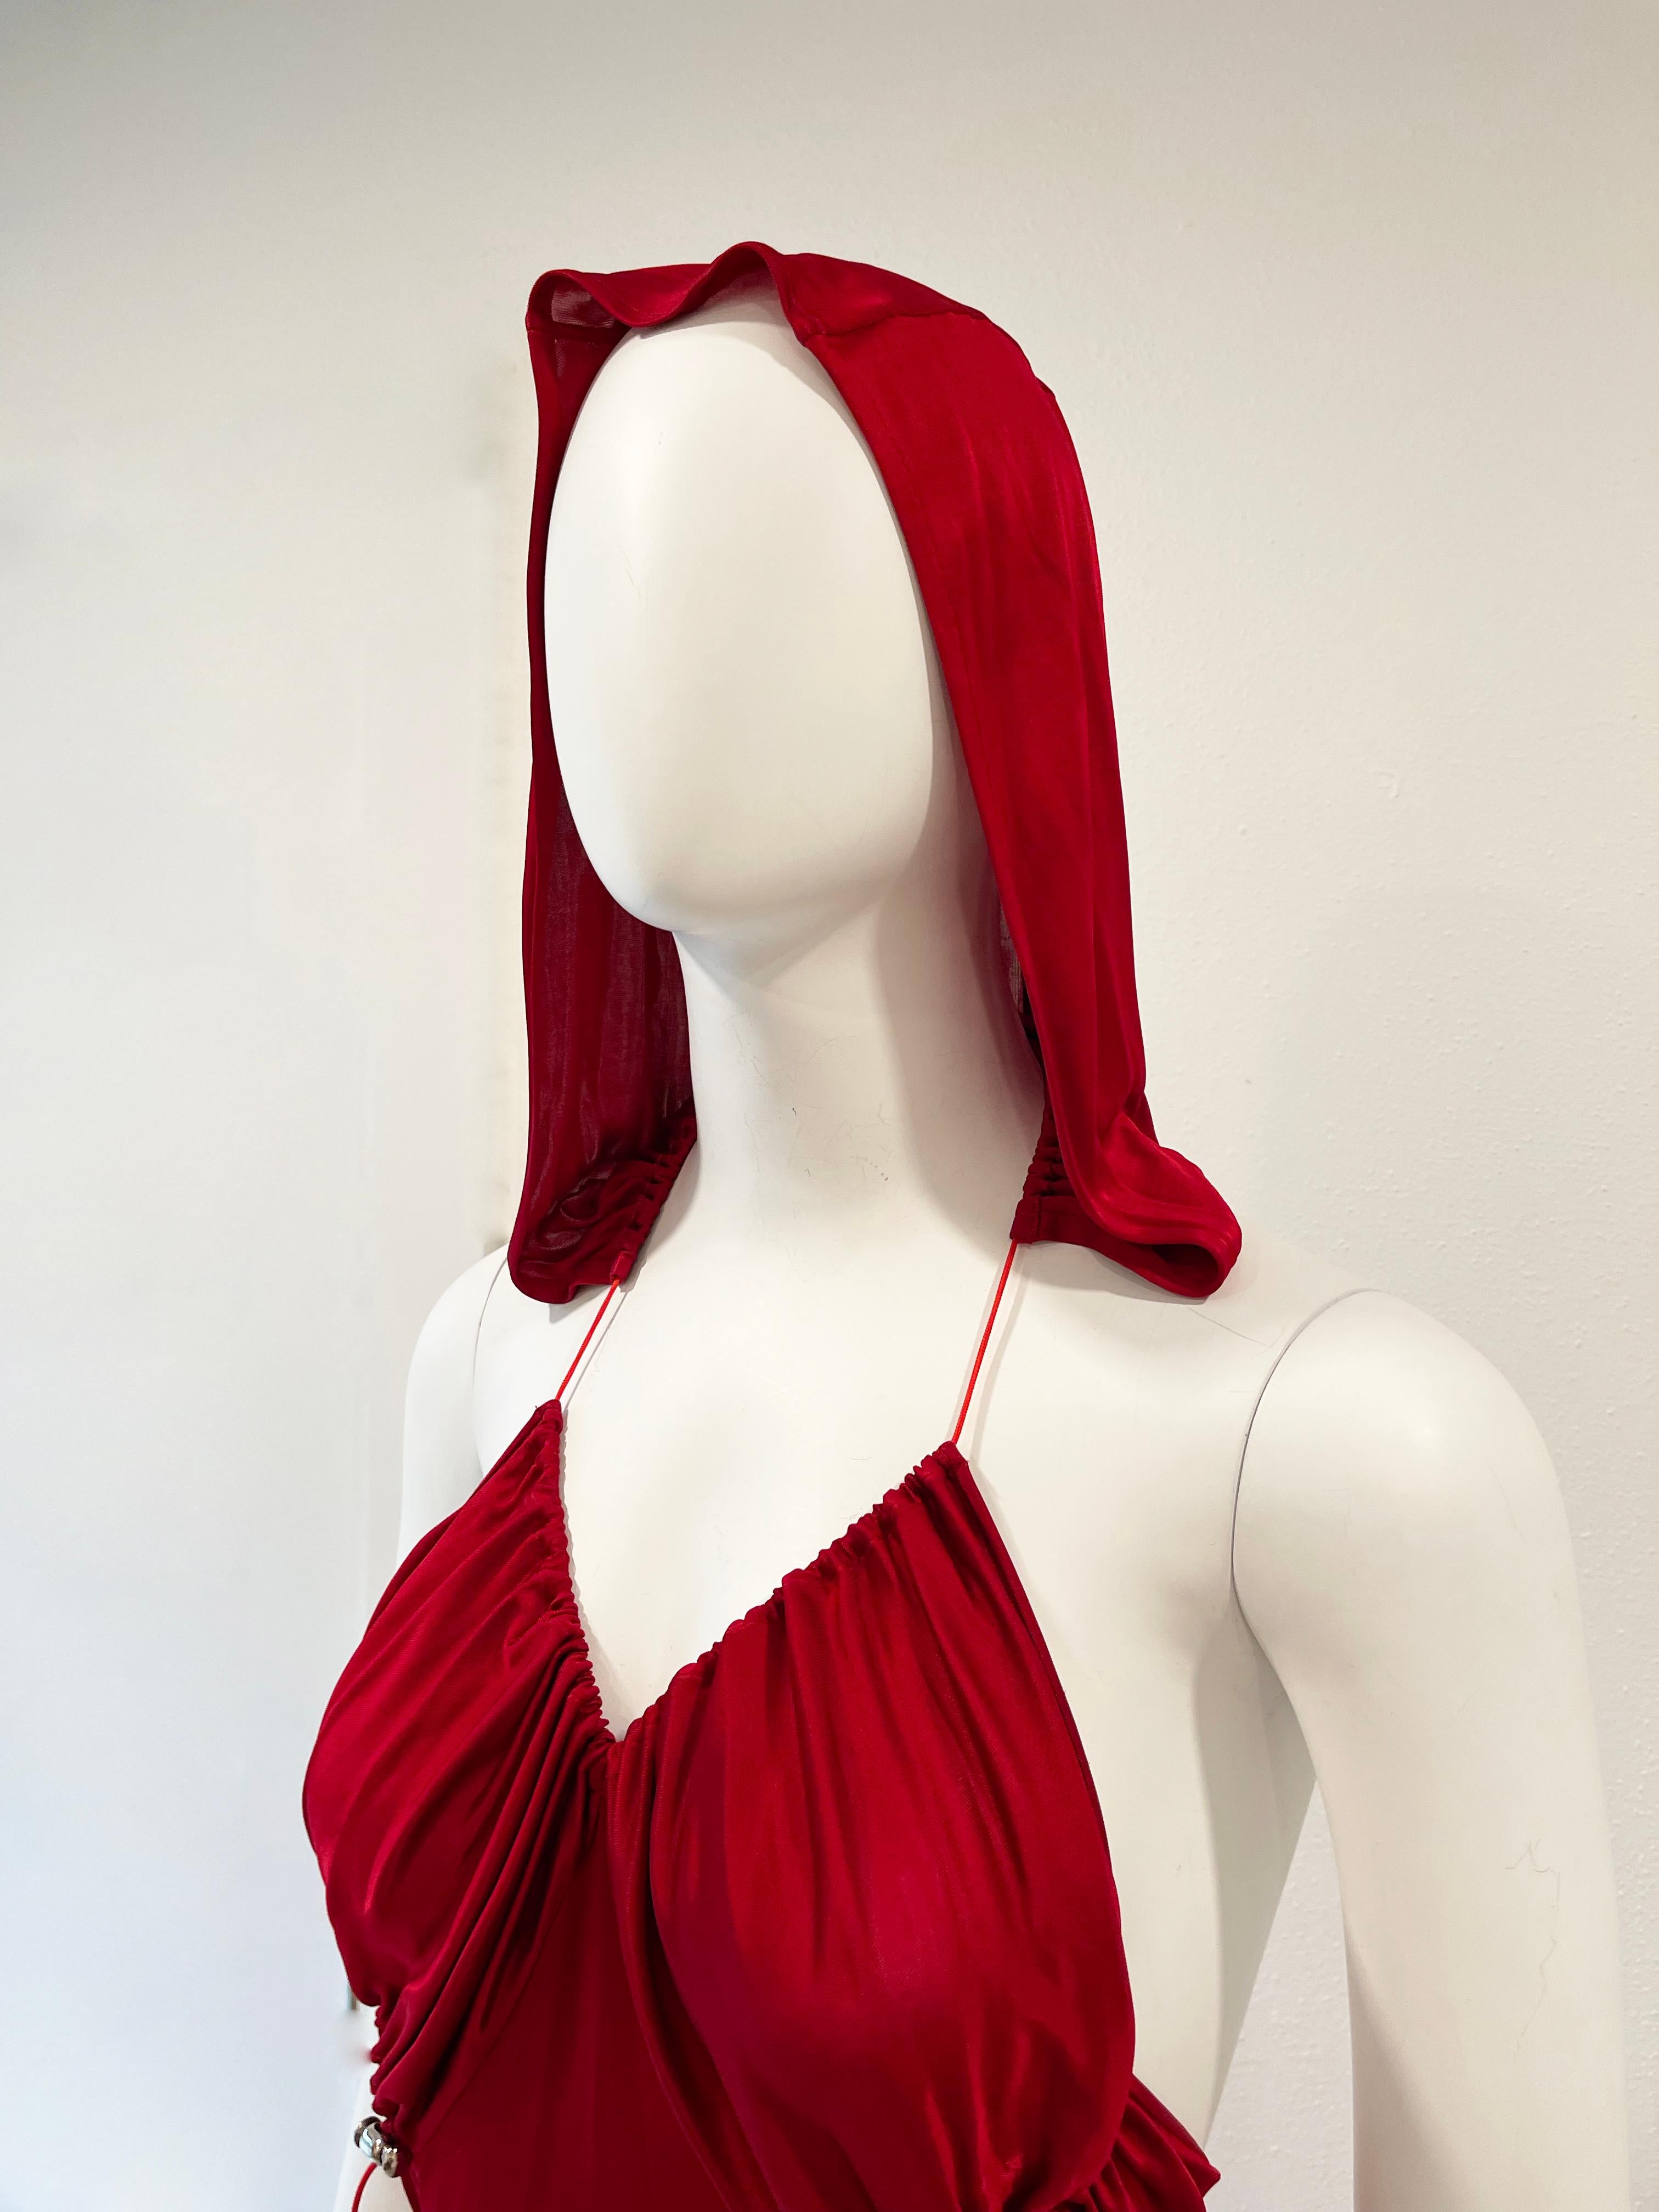 Galliano Hooded Red Evening Gown.  Two side slits. Drawstring halter attached to hood. Has stretch
Condition: Excellent
size s / m 

